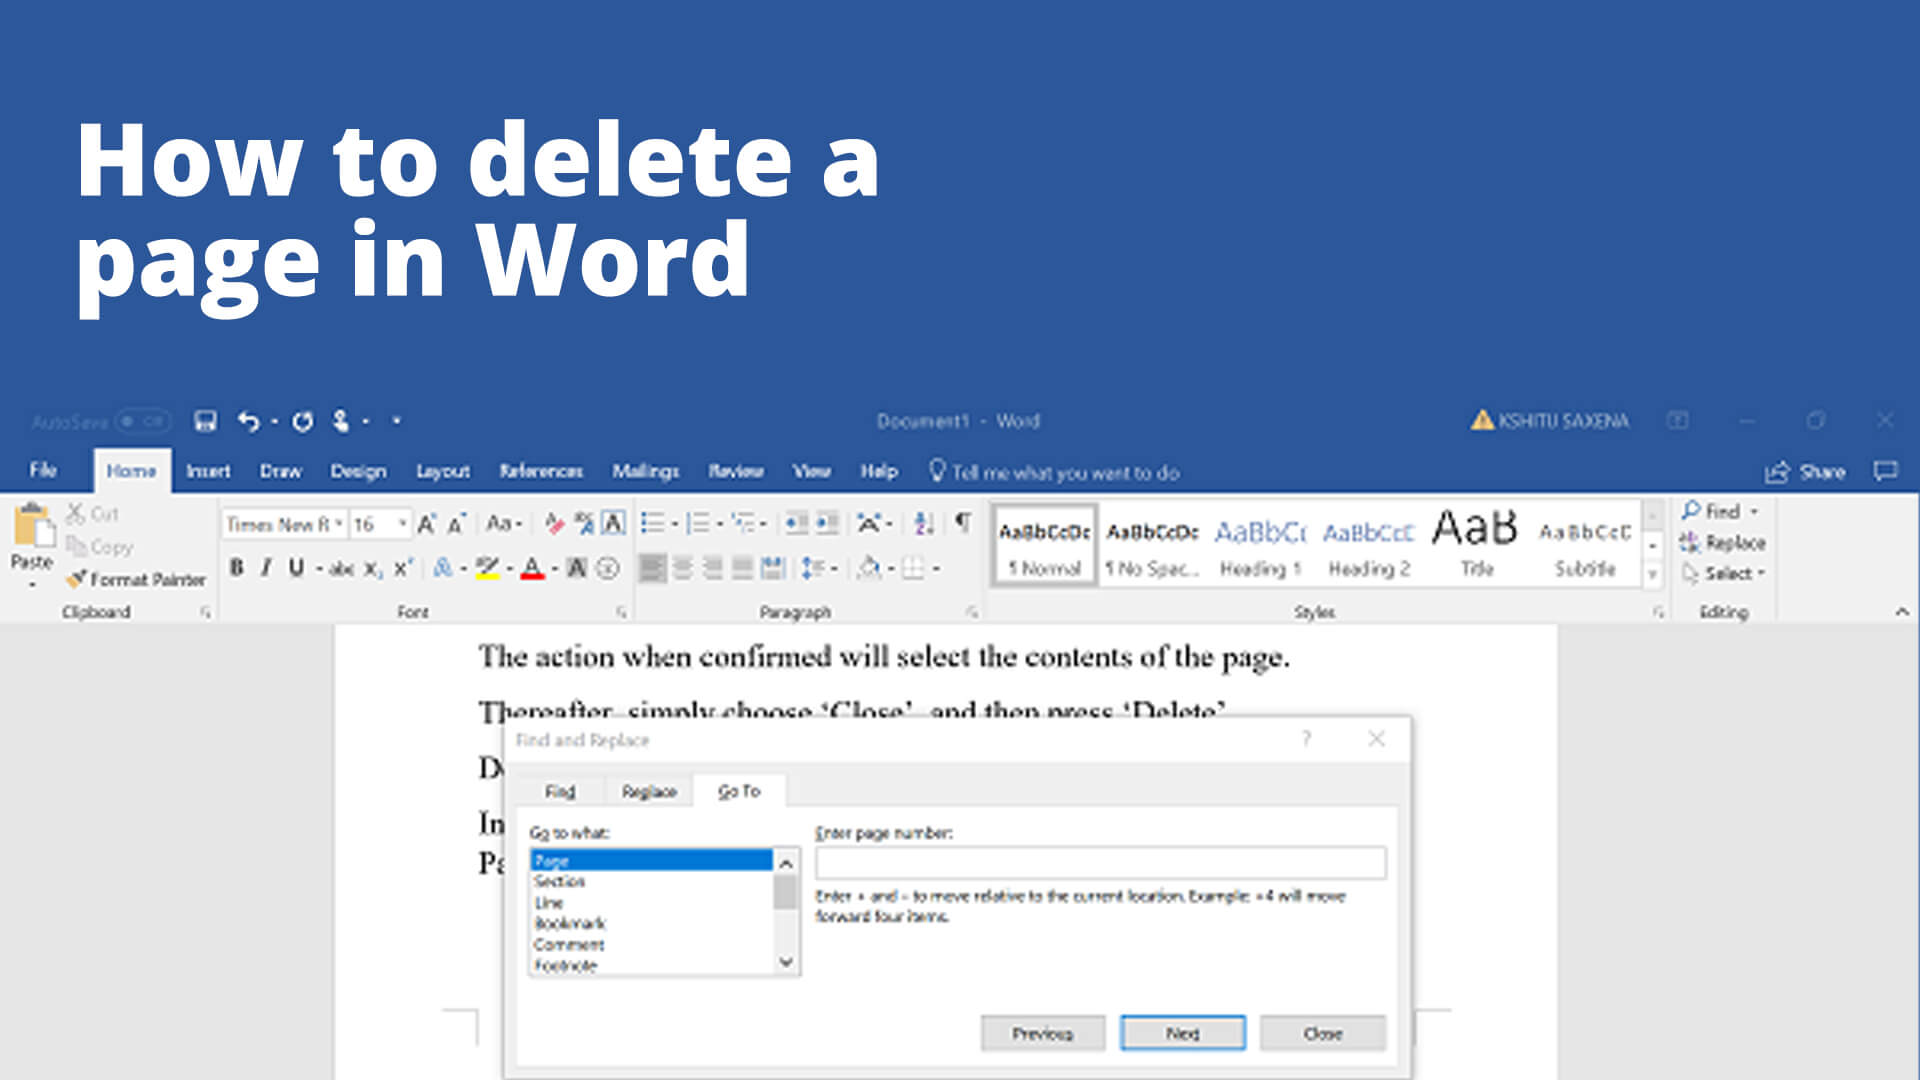 How to Delete a Page in Word: A Step-by-step Guide